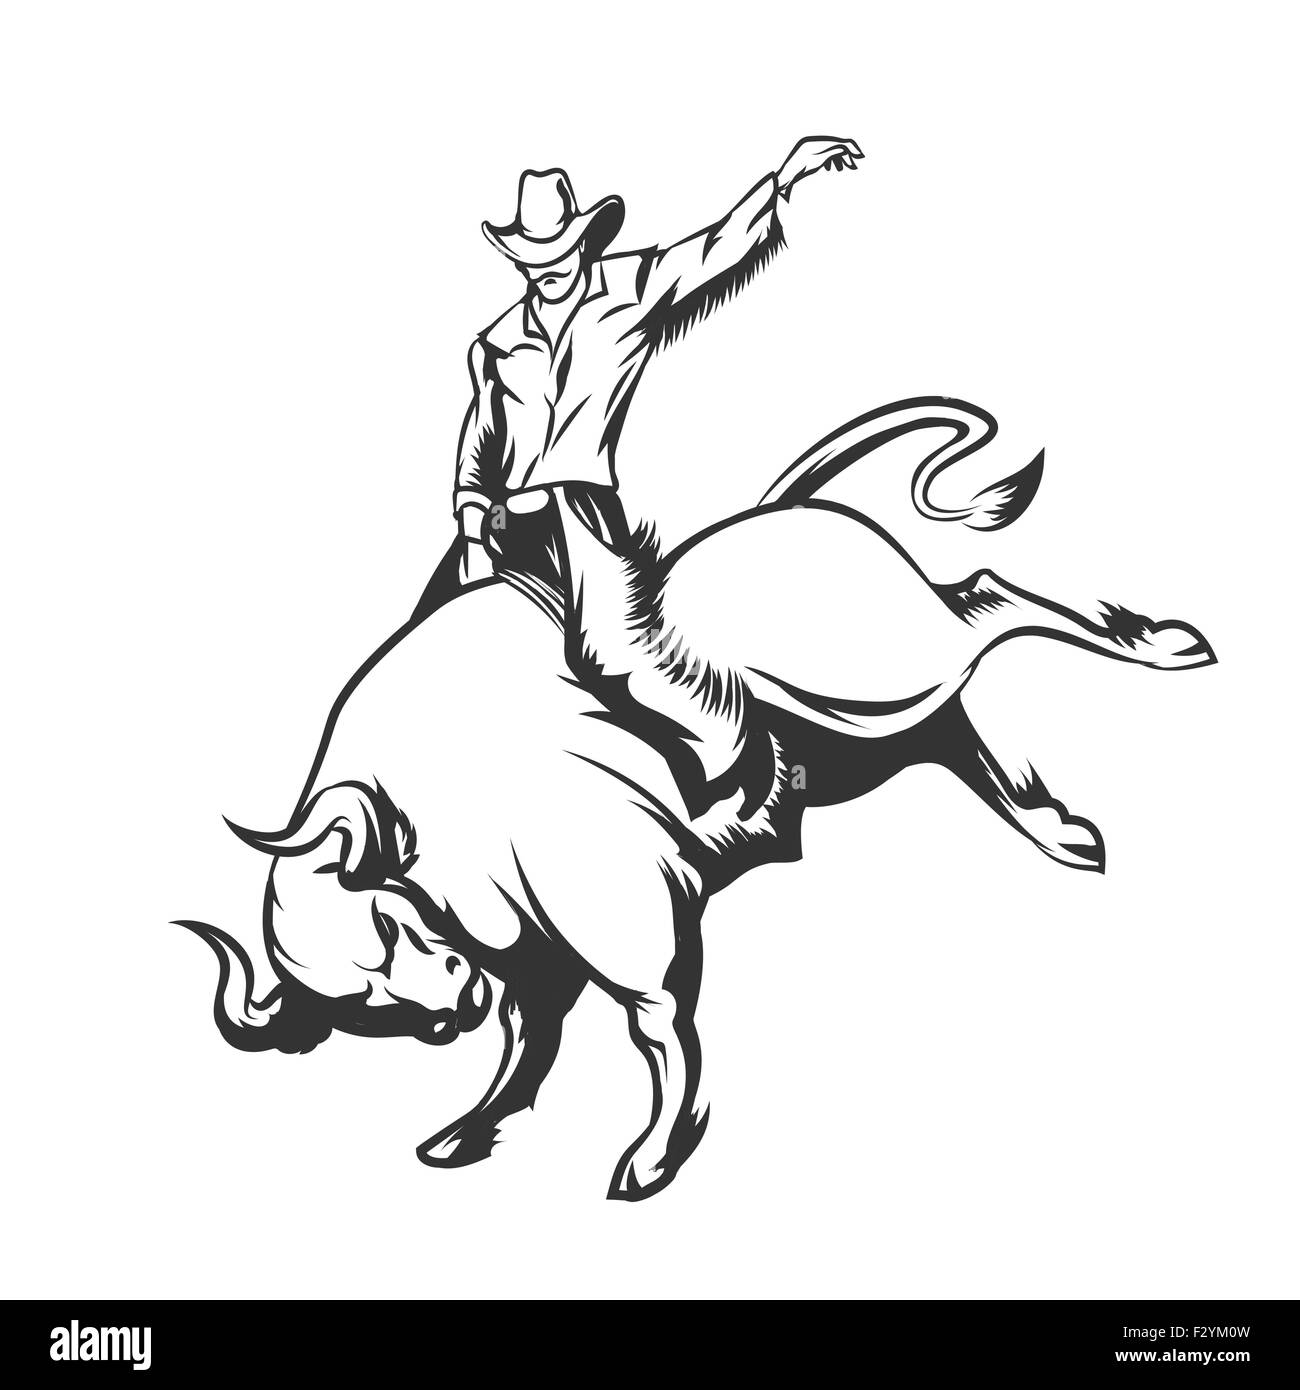 Rodeo cowboy riding a wild bull. Monochrome isolated on white. Stock Vector